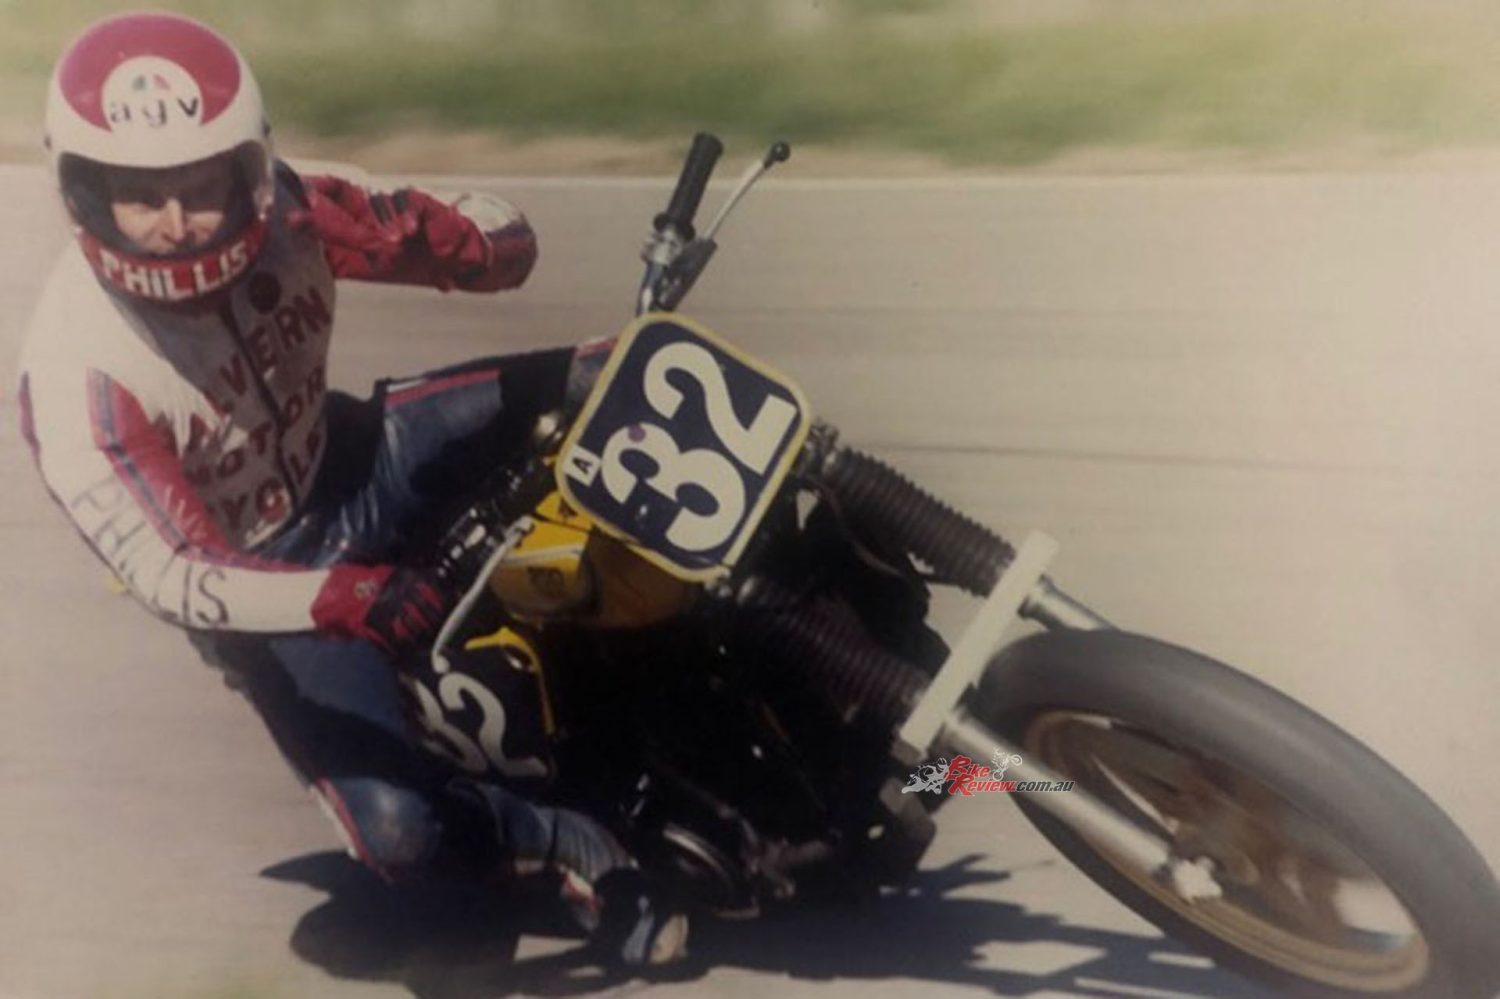 Rob racing at Winton on a borrowed bike. Some of these bikes would've been a handful on a road course...